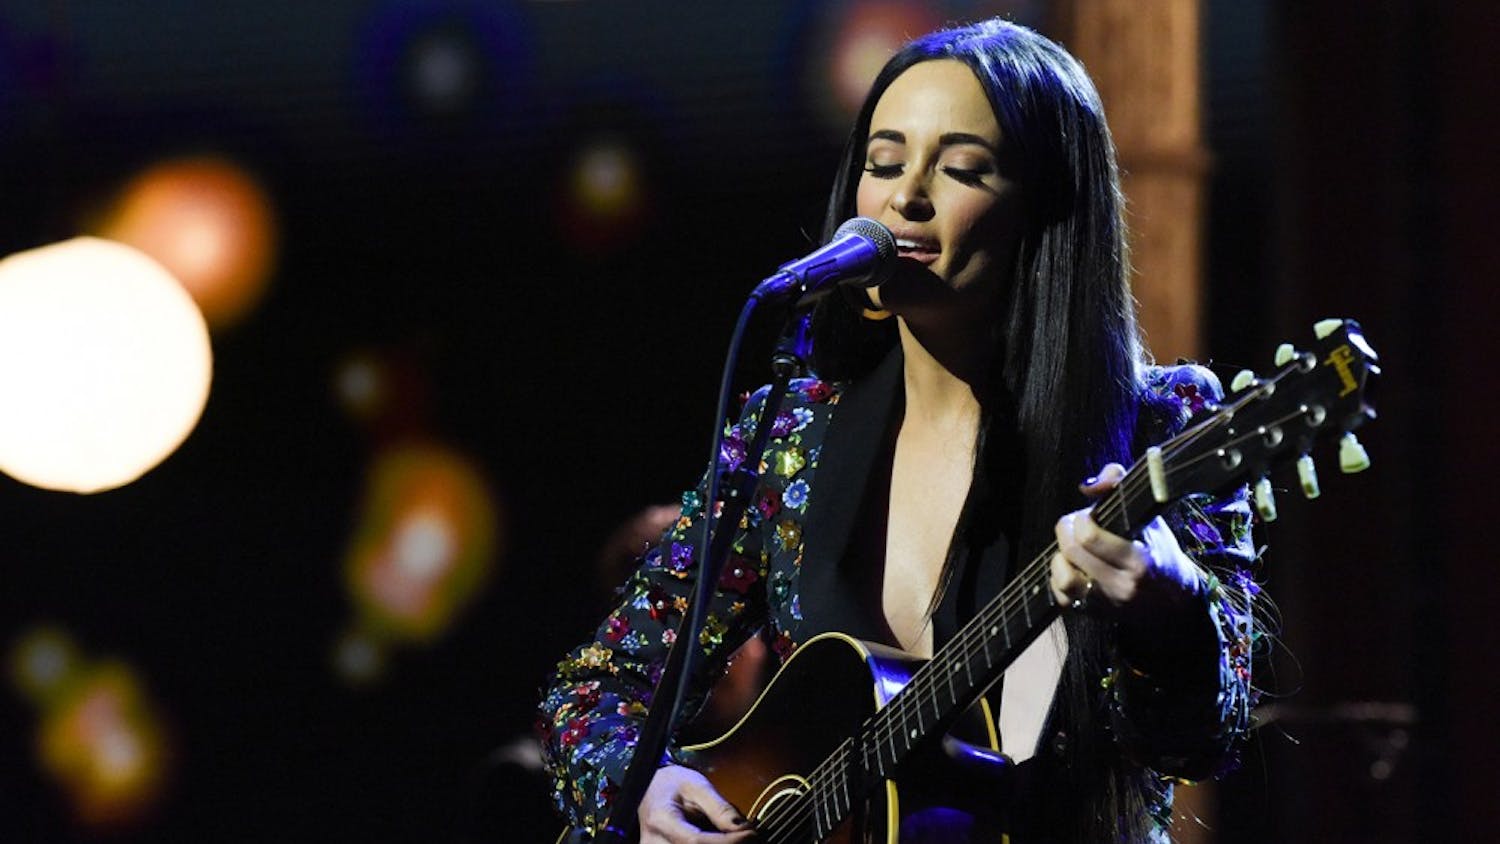 While Kacey Musgraves'&nbsp;Golden Hour is named for a particular time of day, don’t be fooled: This album can be played at any time of day during any time of year to successfully soothe you with its warm instrumentals and sincere vocal performances.